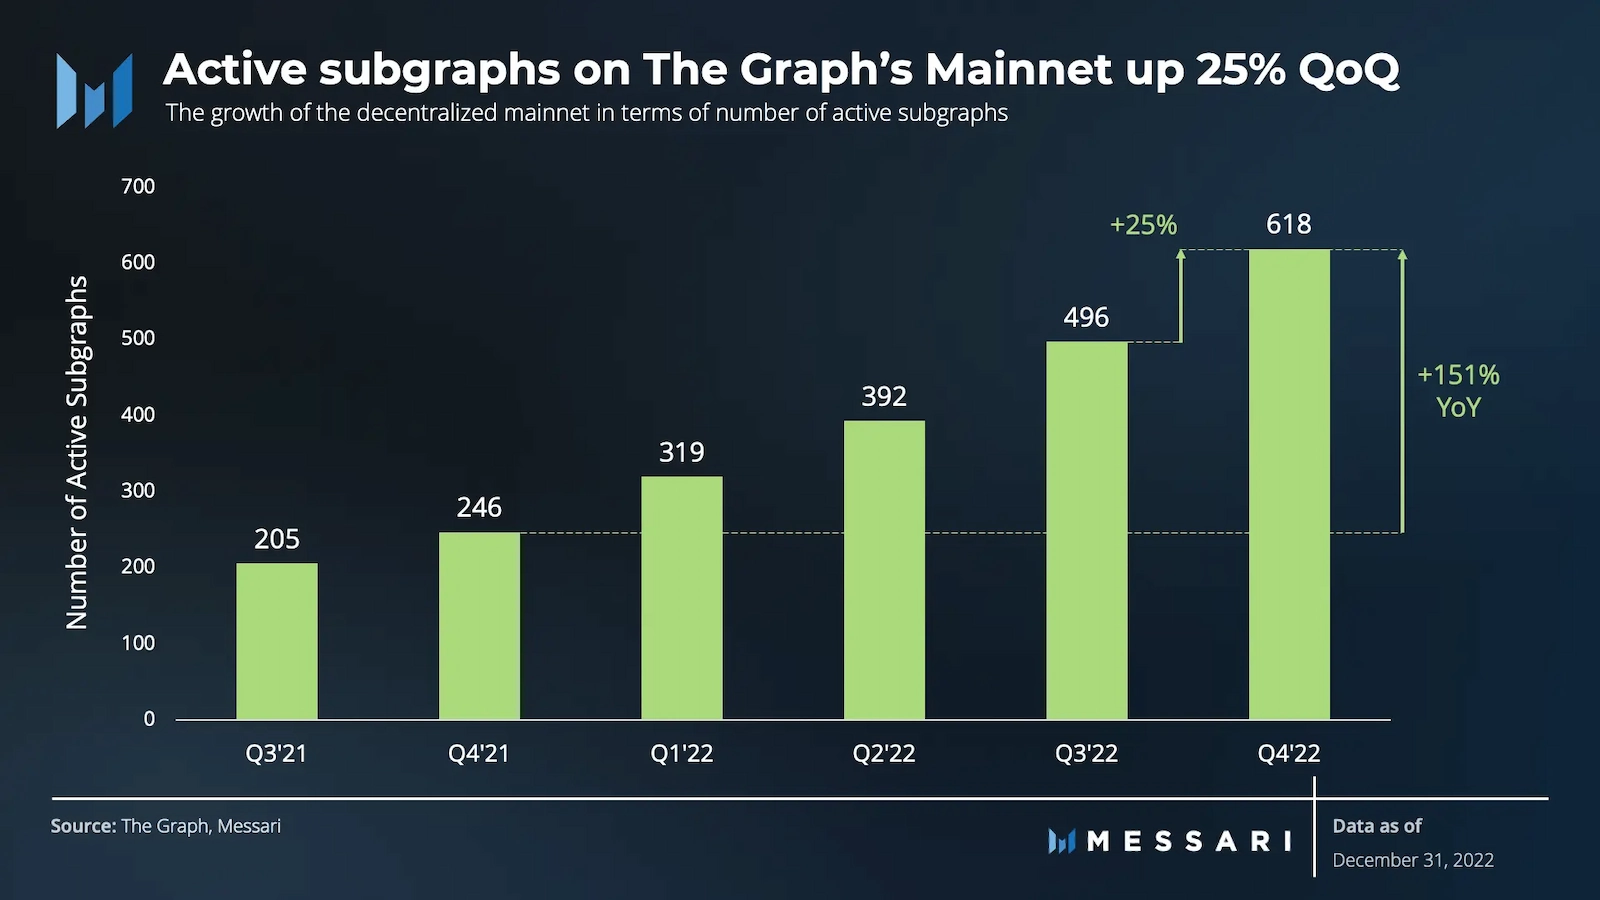 Messari highlighted the growth of subgraphs on The Graph's mainnet